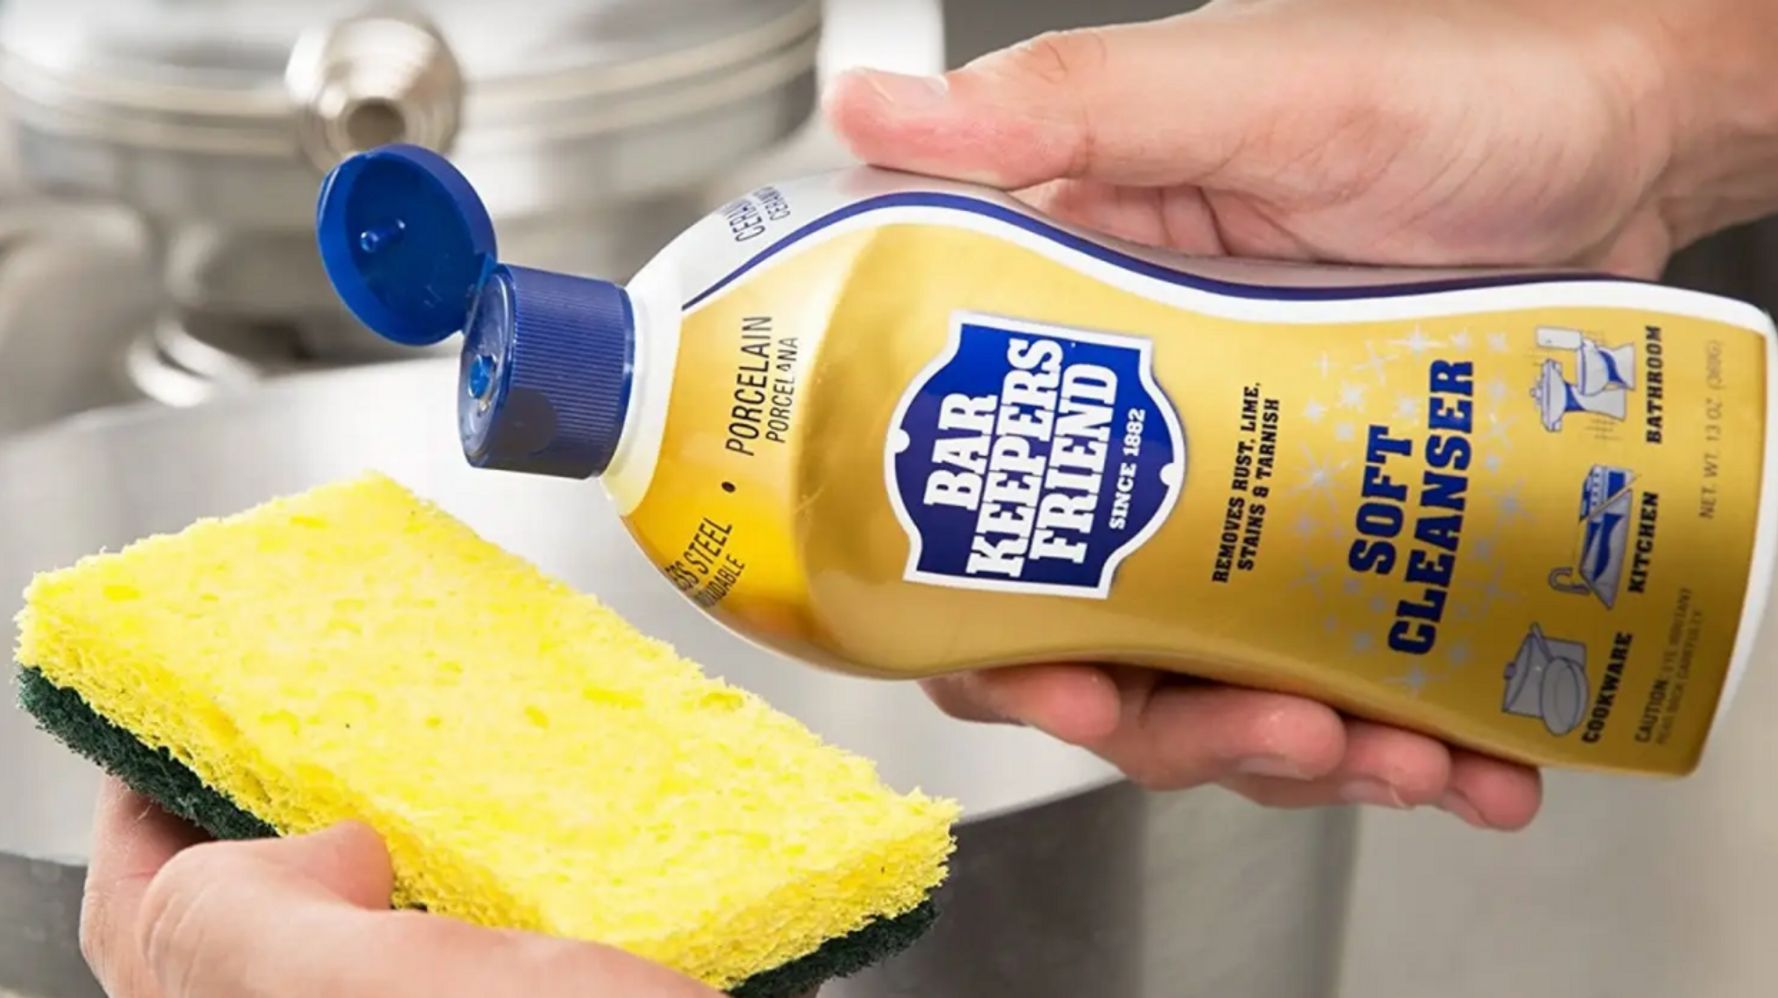 21 Things To Keep Your Home Cleaner If You Have Kids